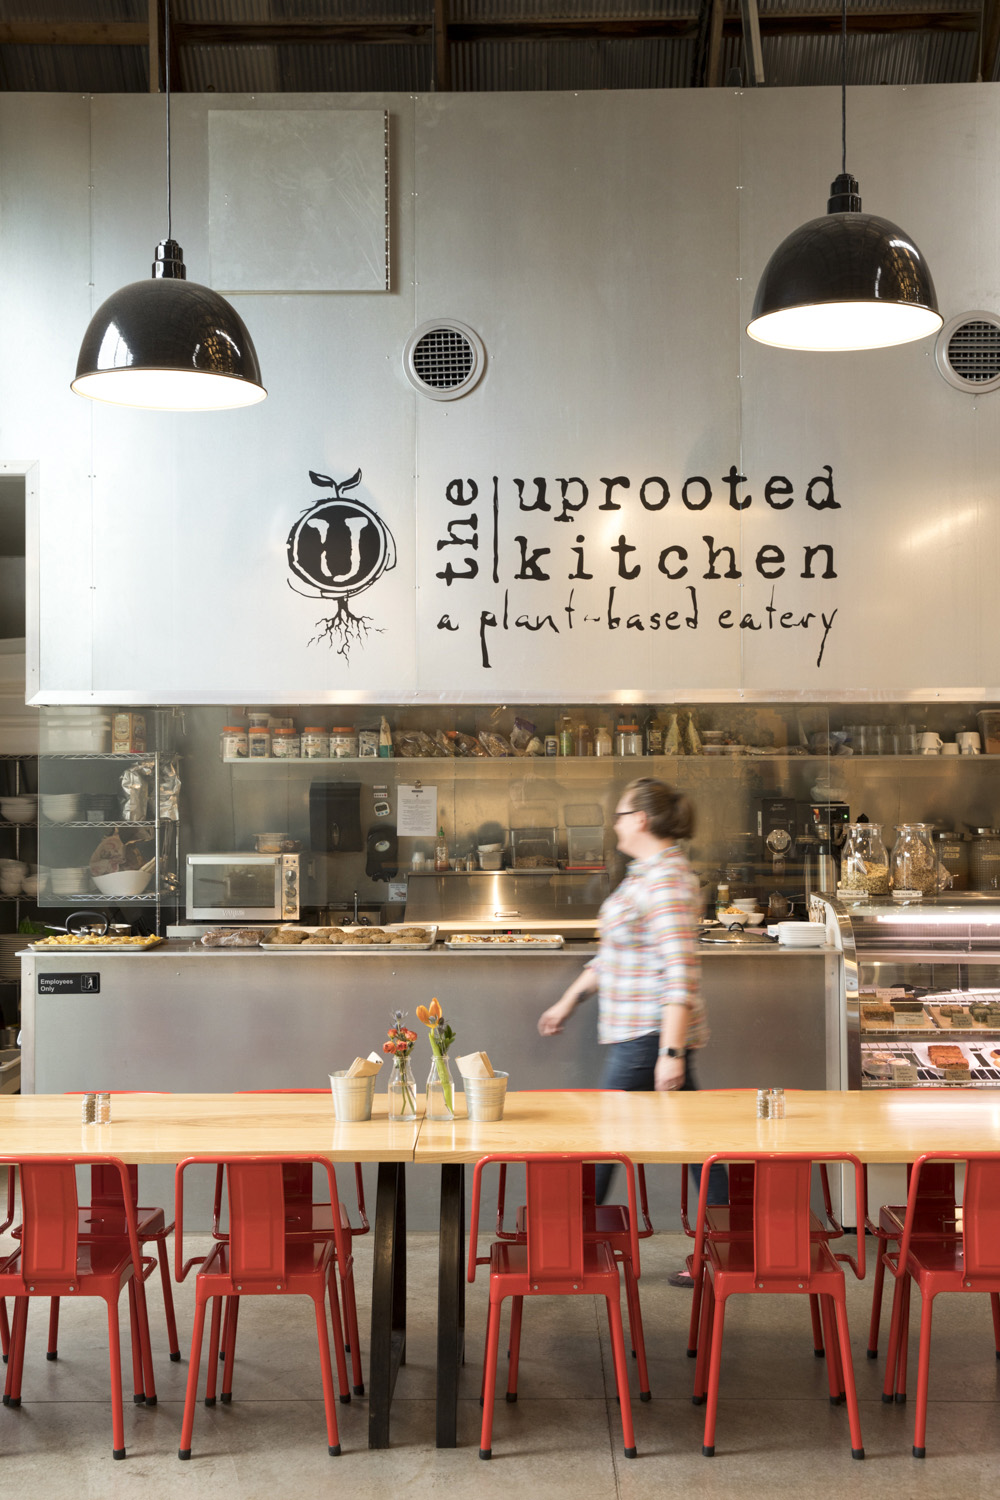 The Uprooted Kitchen